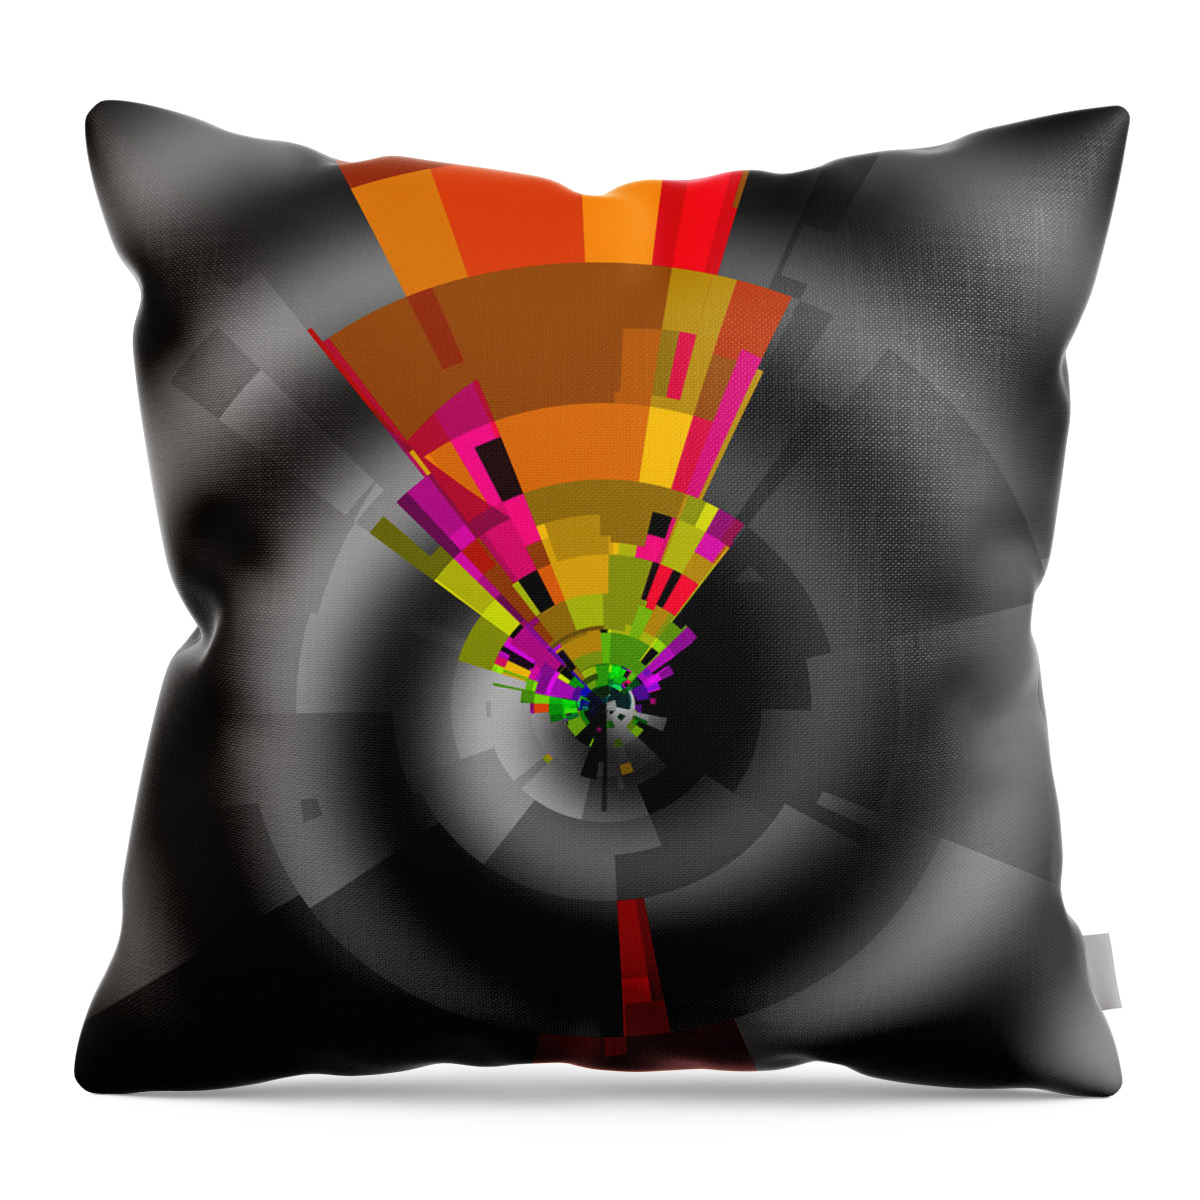 Abstract Throw Pillow featuring the digital art Mcconitive by Andrew Kotlinski